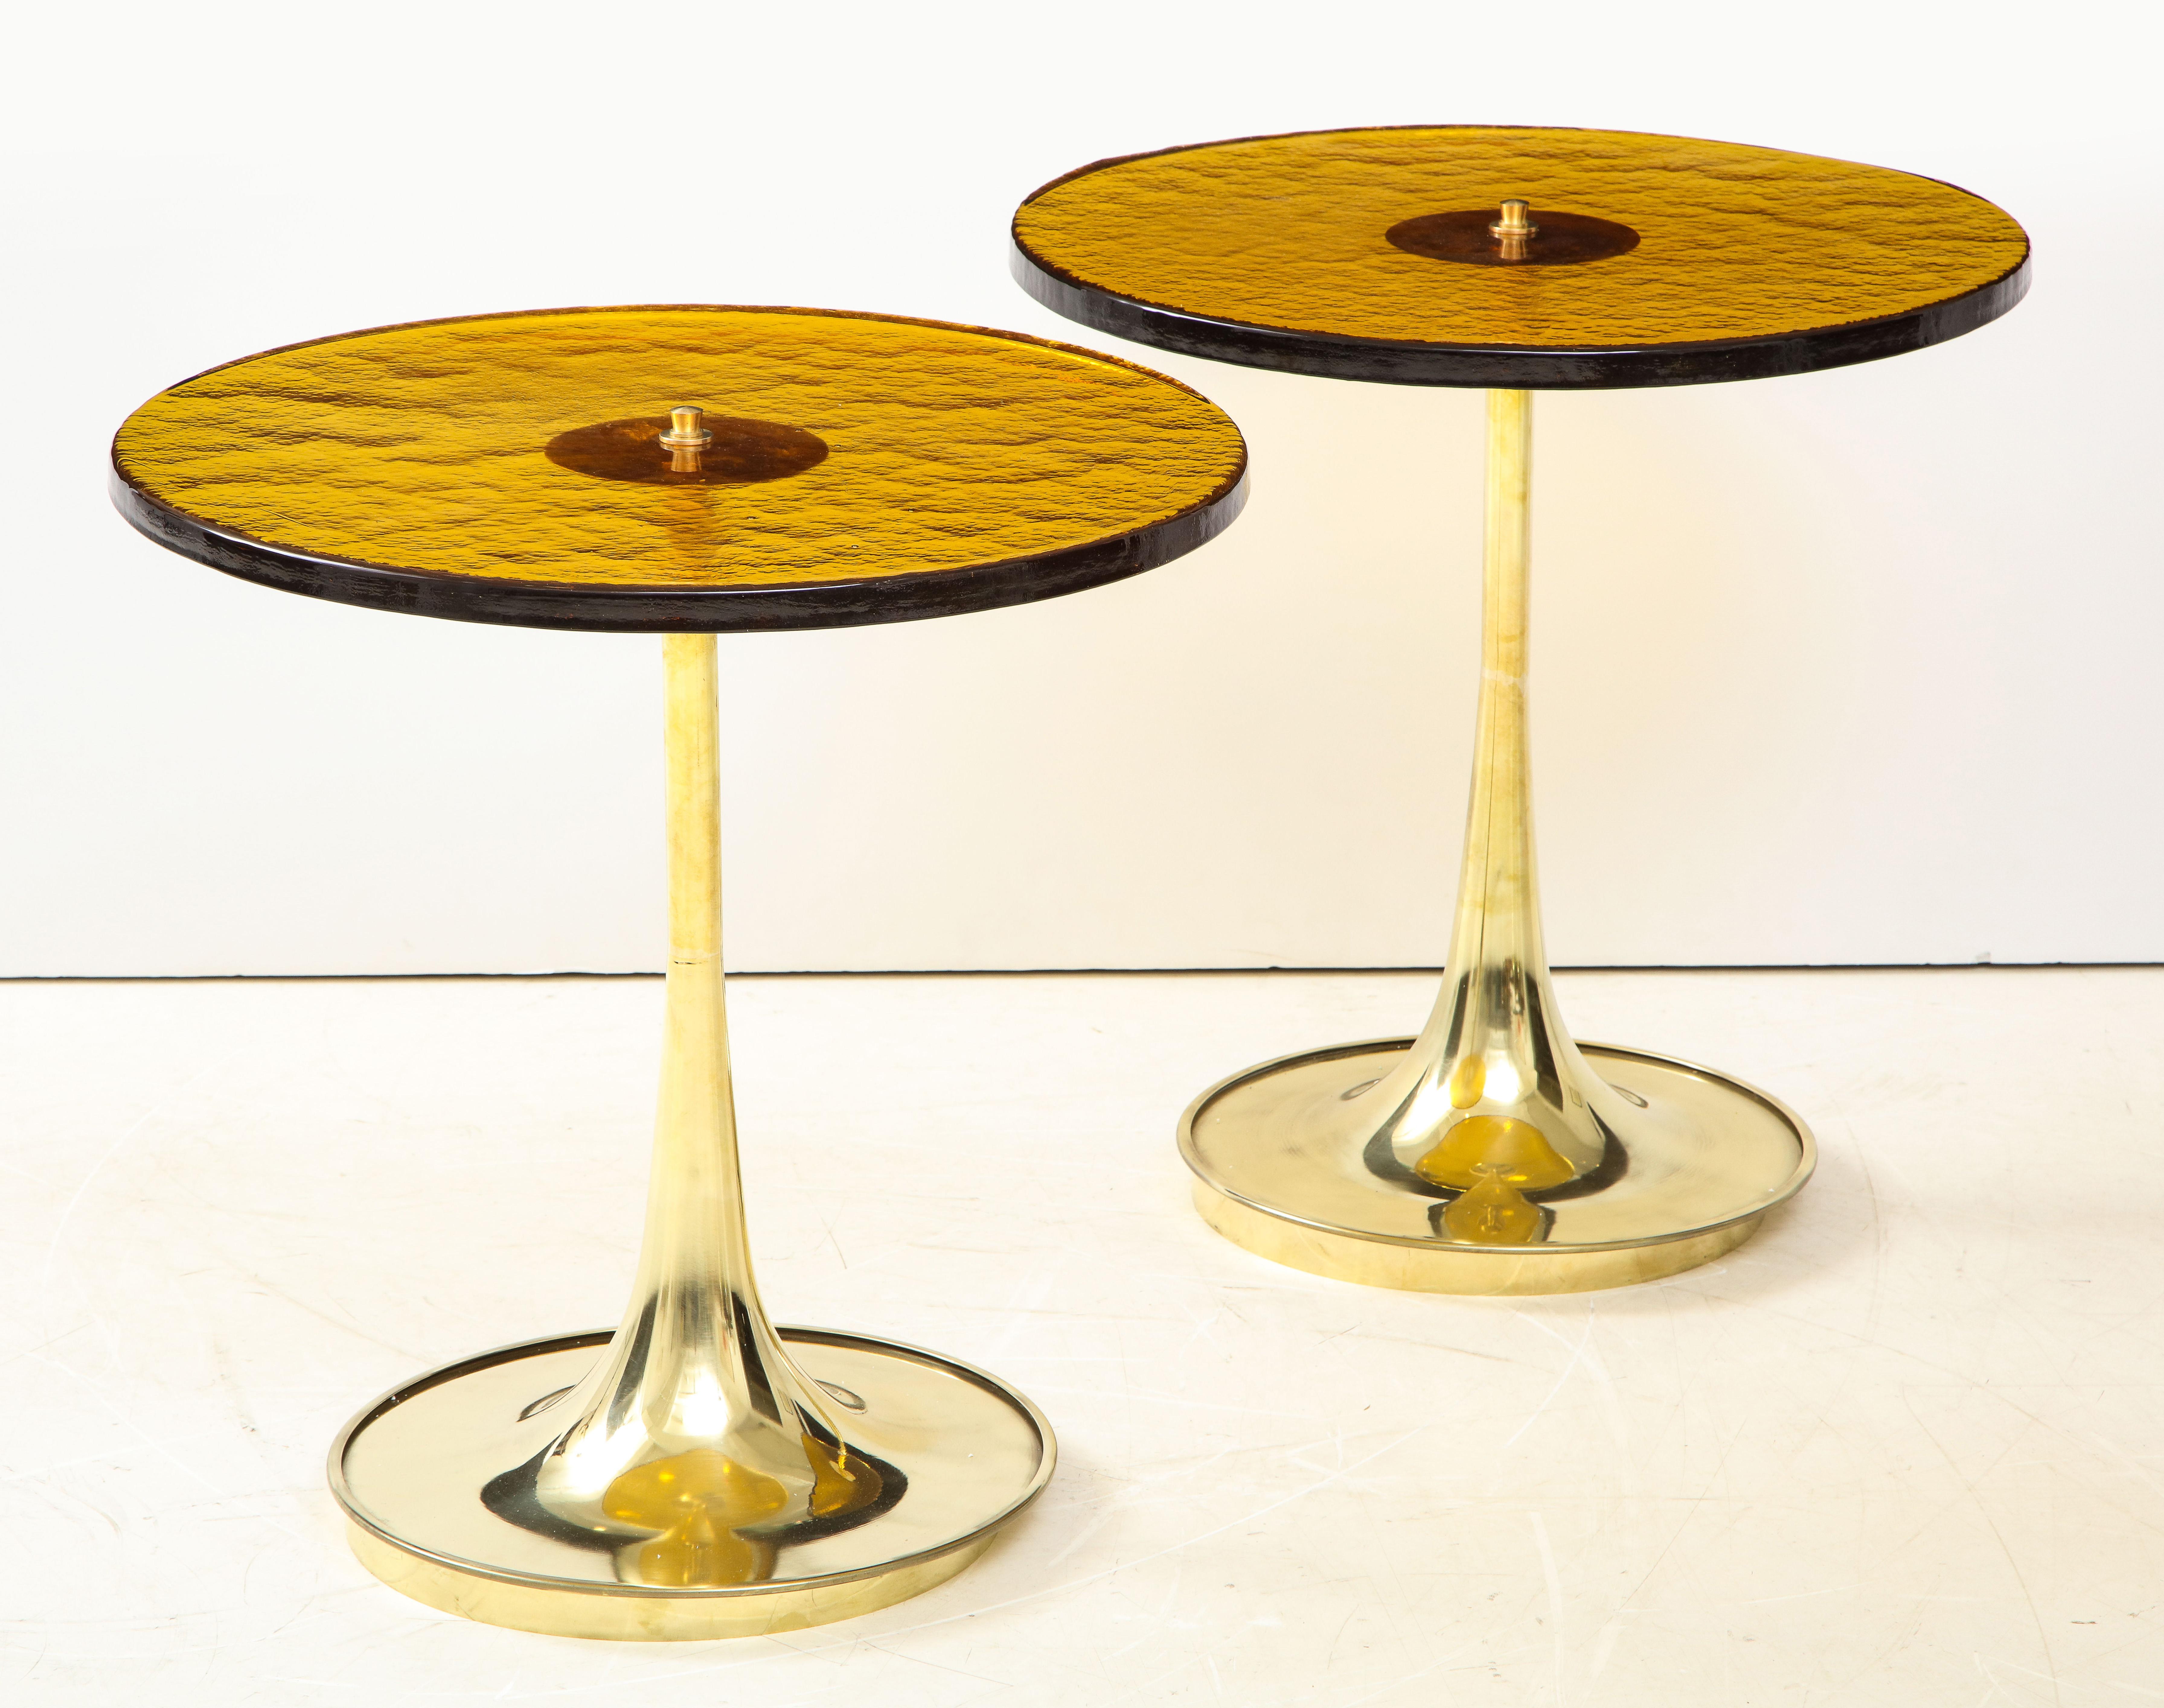 Hand-Crafted Pair of Round Bronze Murano Glass and Brass Martini or Side Tables, Italy, 2021